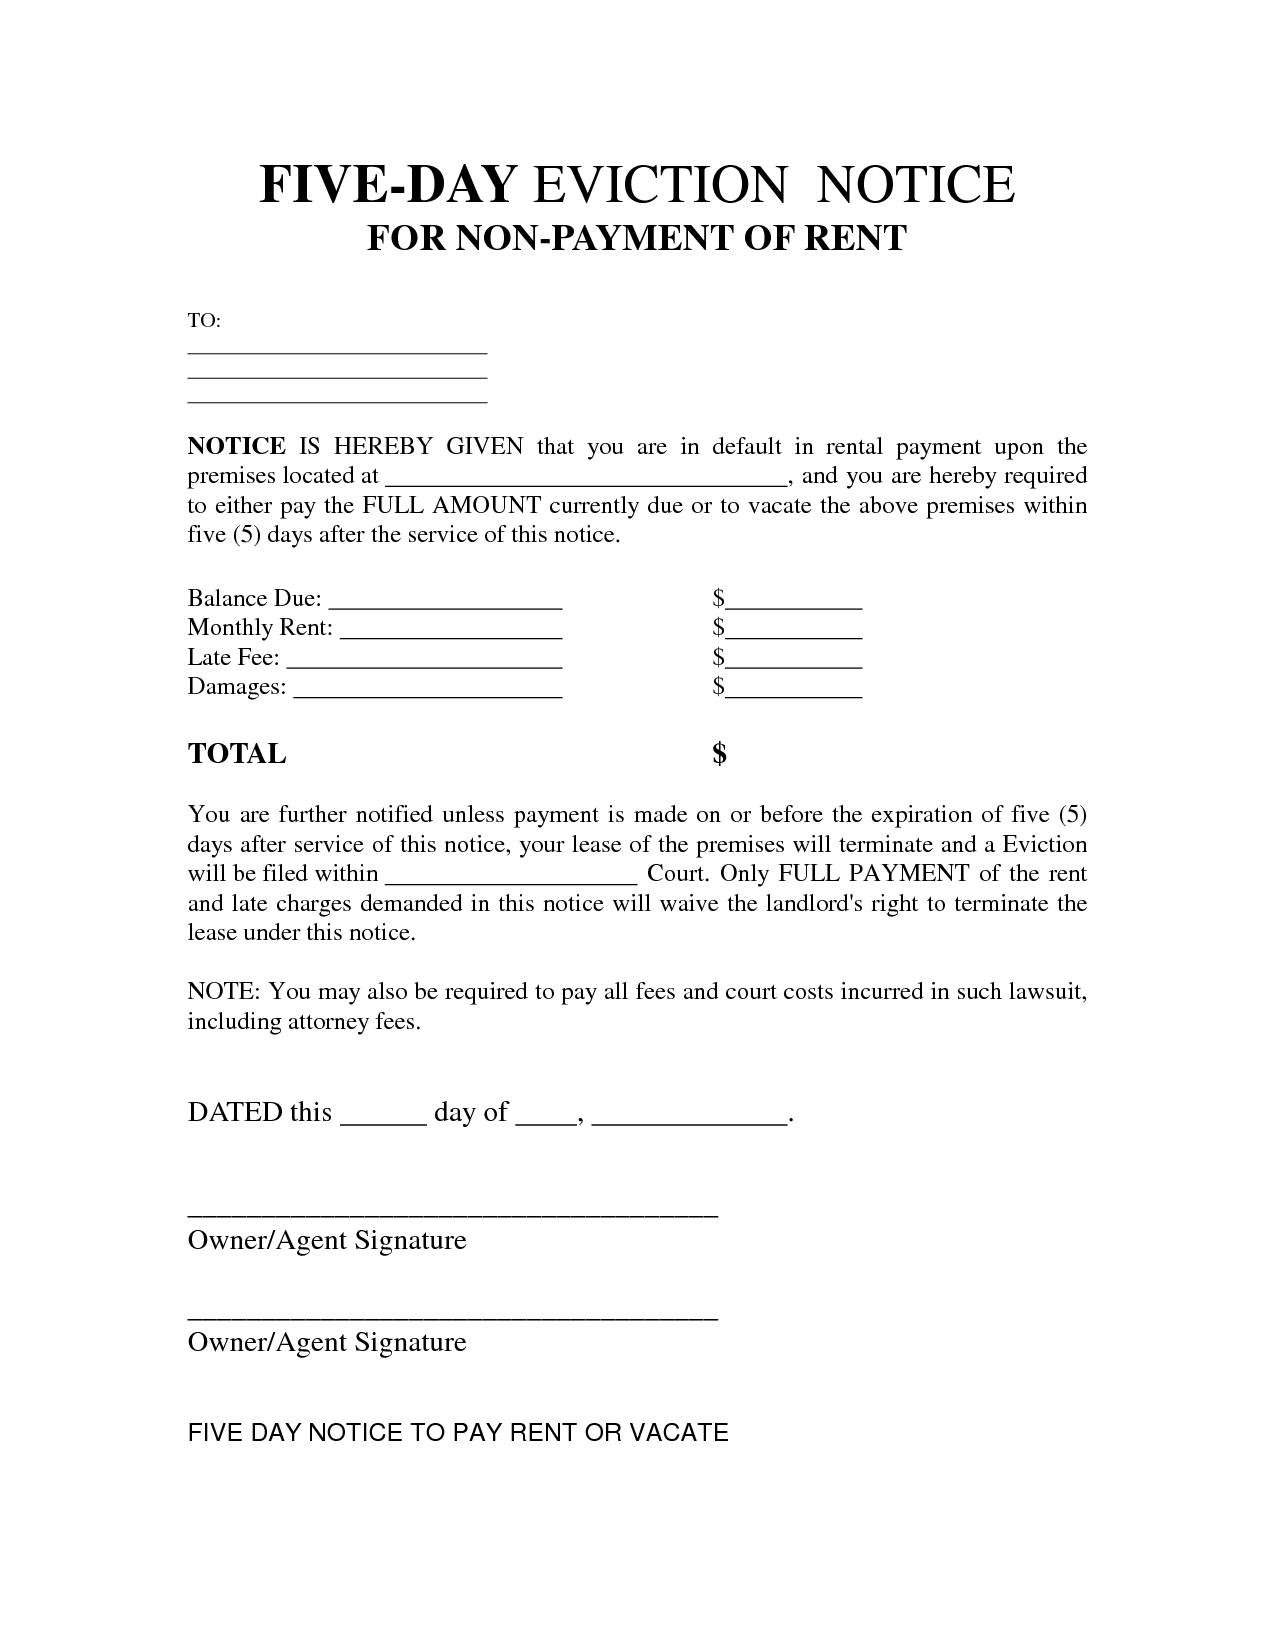 Free Printable Eviction Notice Letter | Bagnas - 5 Day Eviction - Free Printable Eviction Notice